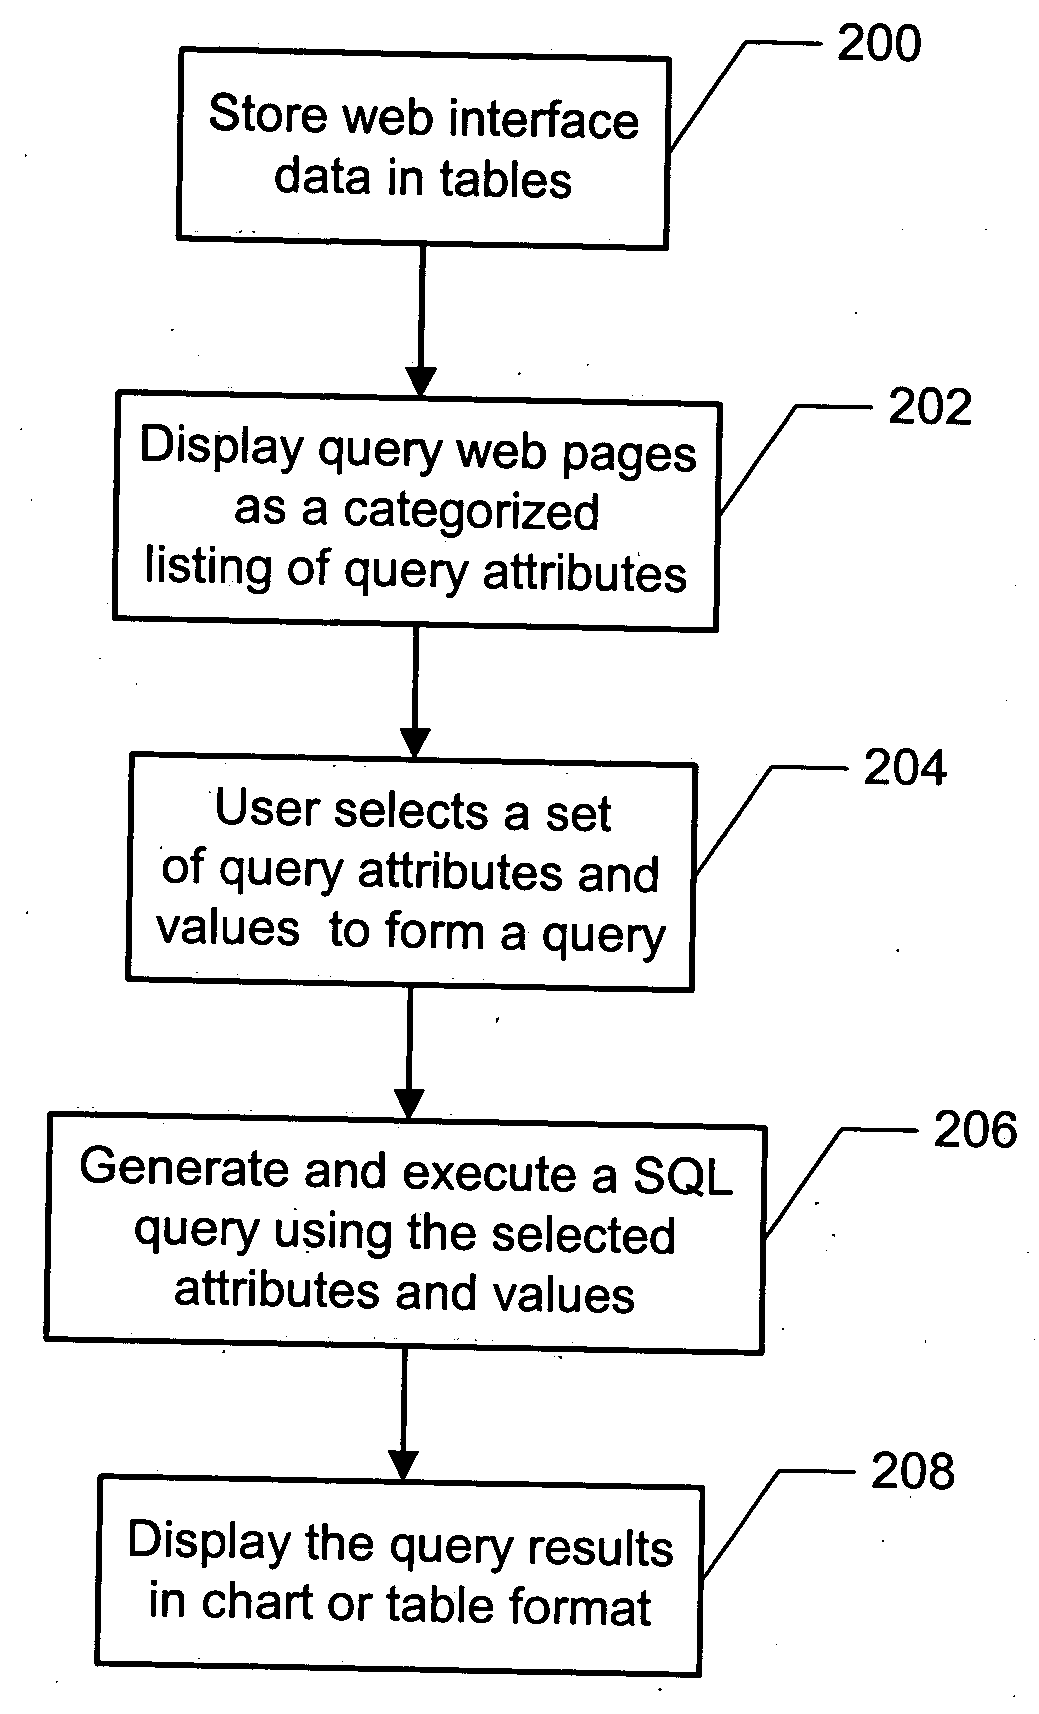 Dynamic graphical user interface and query logic SQL generator used for developing Web-based database applications